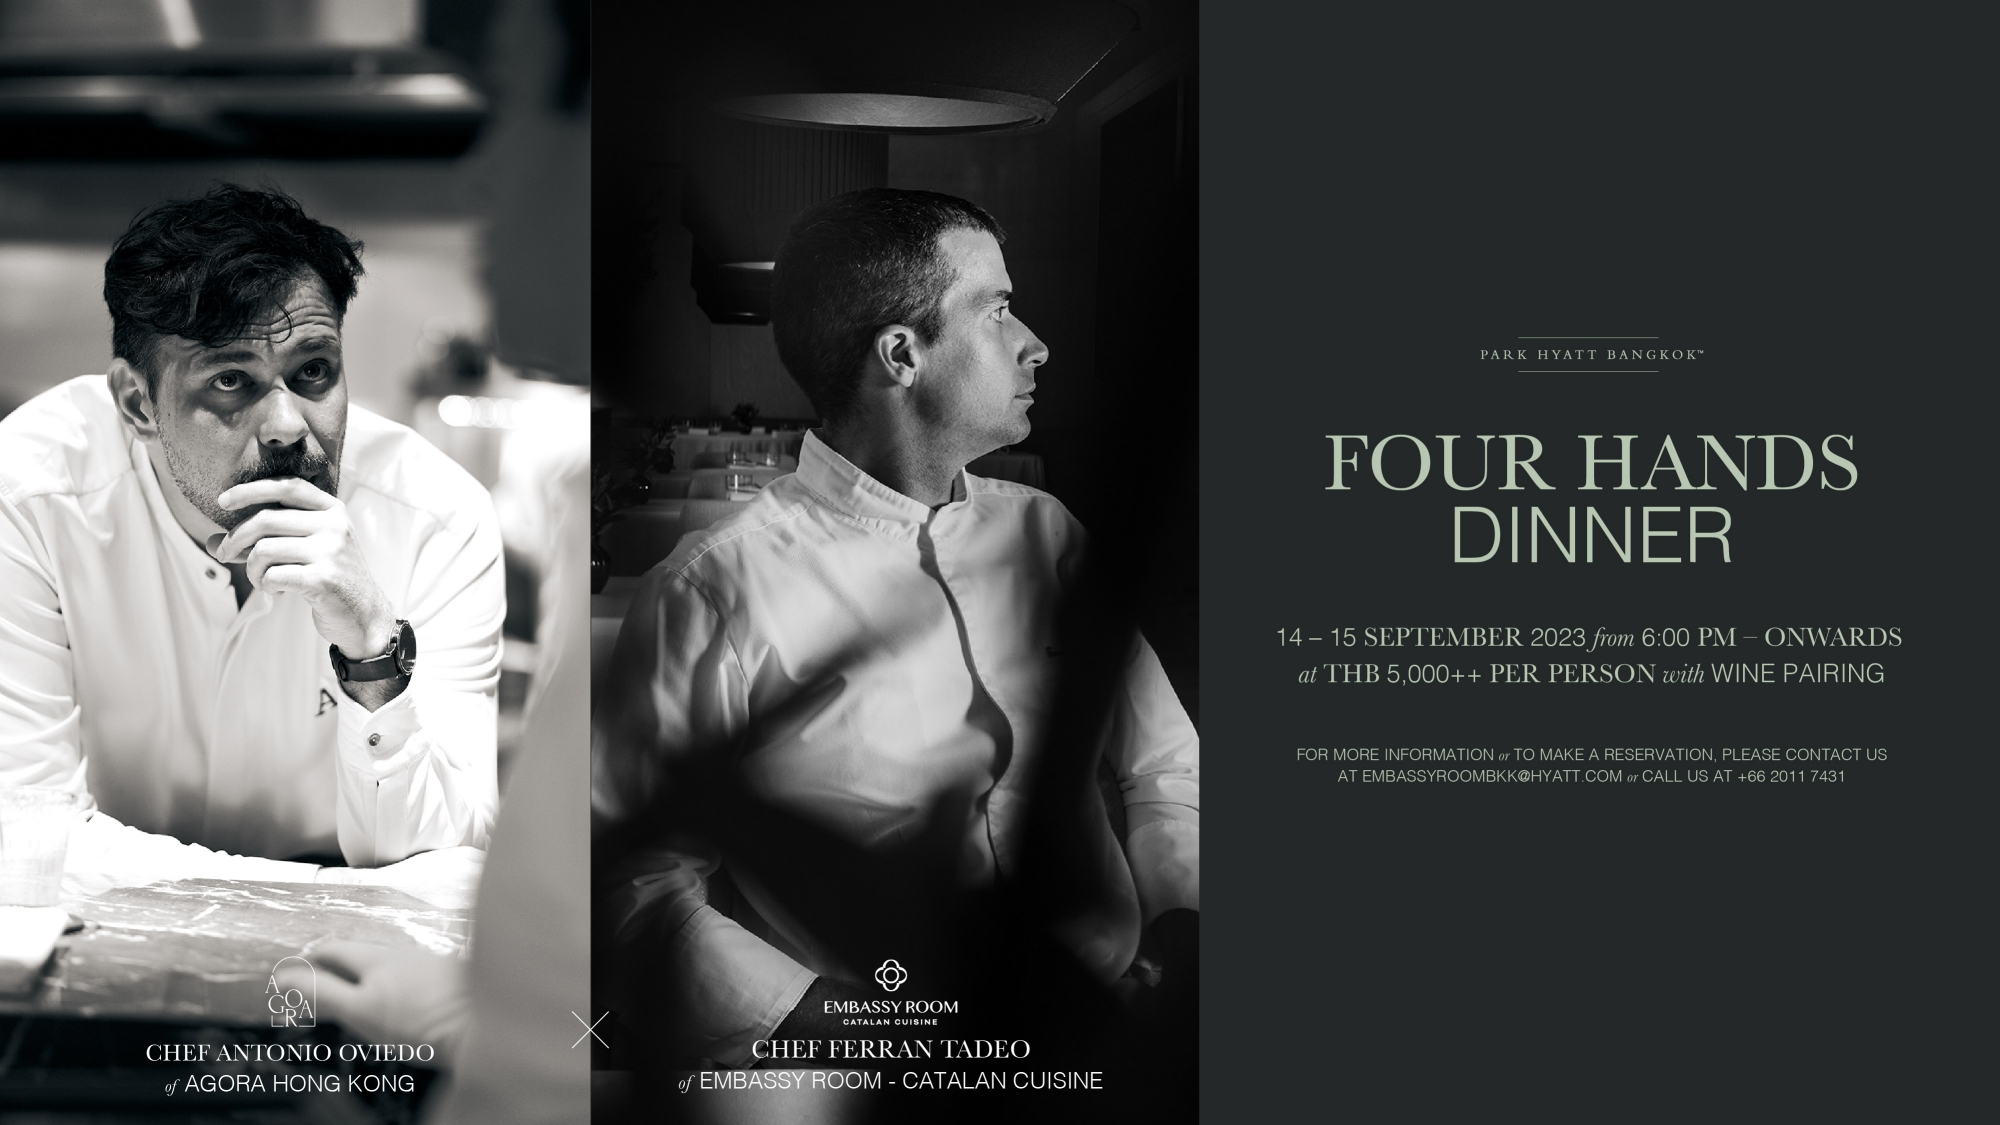 Four Hands Dinner with Chef Ferran Tadeo of Embassy Room – Catalan Cuisine and Chef Antonio Oviedo of Agora Hong Kong